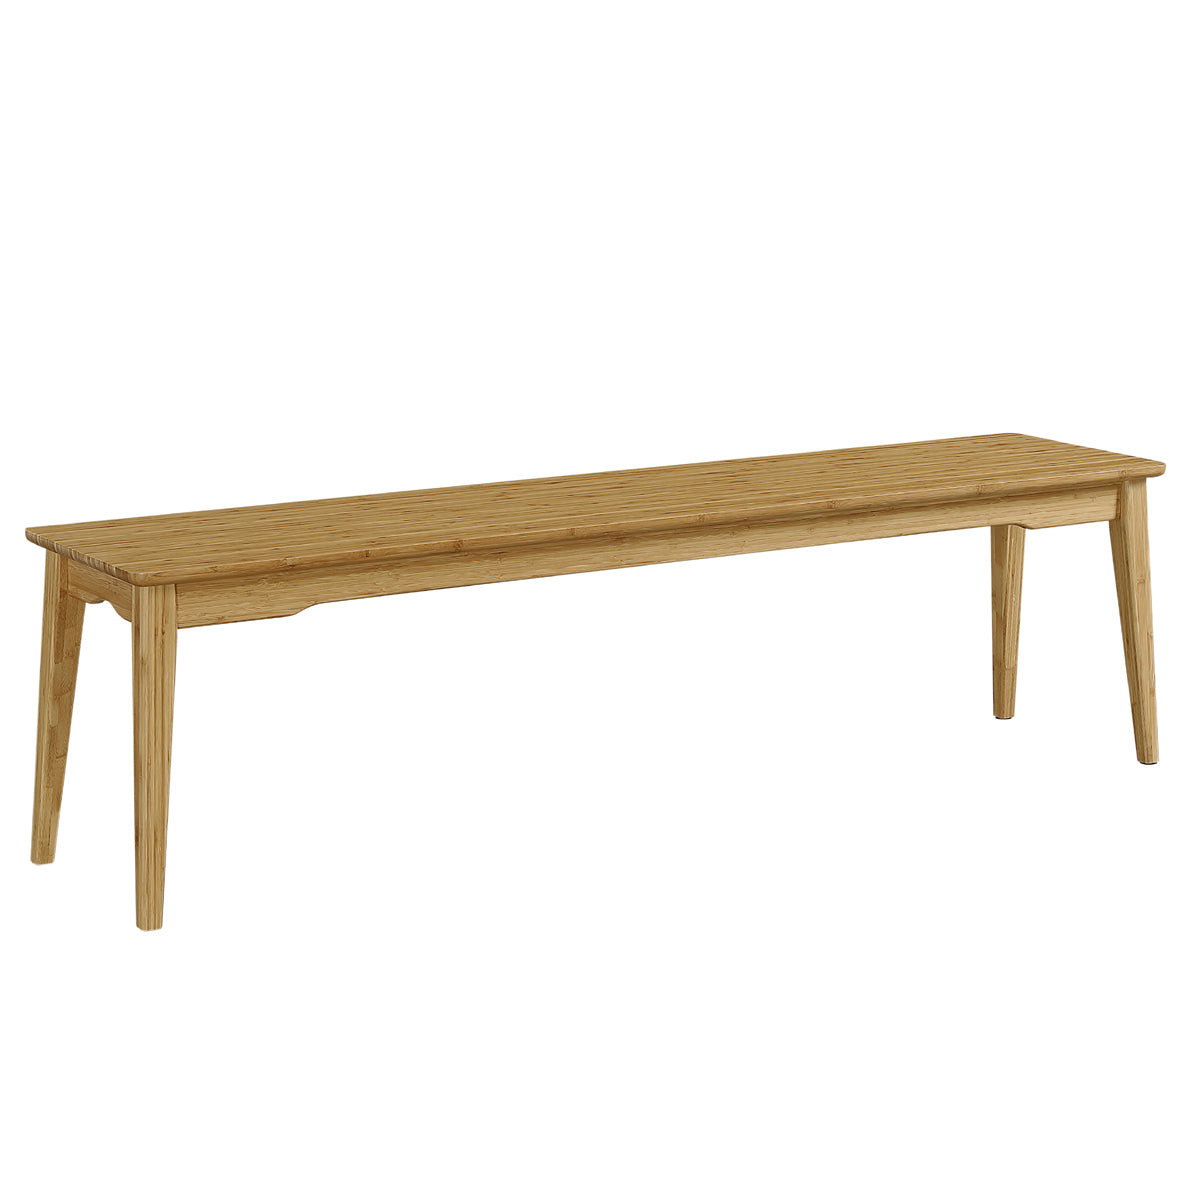 Load image into Gallery viewer, Currant Long Bench CaramelizedDining Chairs &amp;amp; Benches Greenington  Caramelized   Four Hands, Burke Decor, Mid Century Modern Furniture, Old Bones Furniture Company, Old Bones Co, Modern Mid Century, Designer Furniture, https://www.oldbonesco.com/
